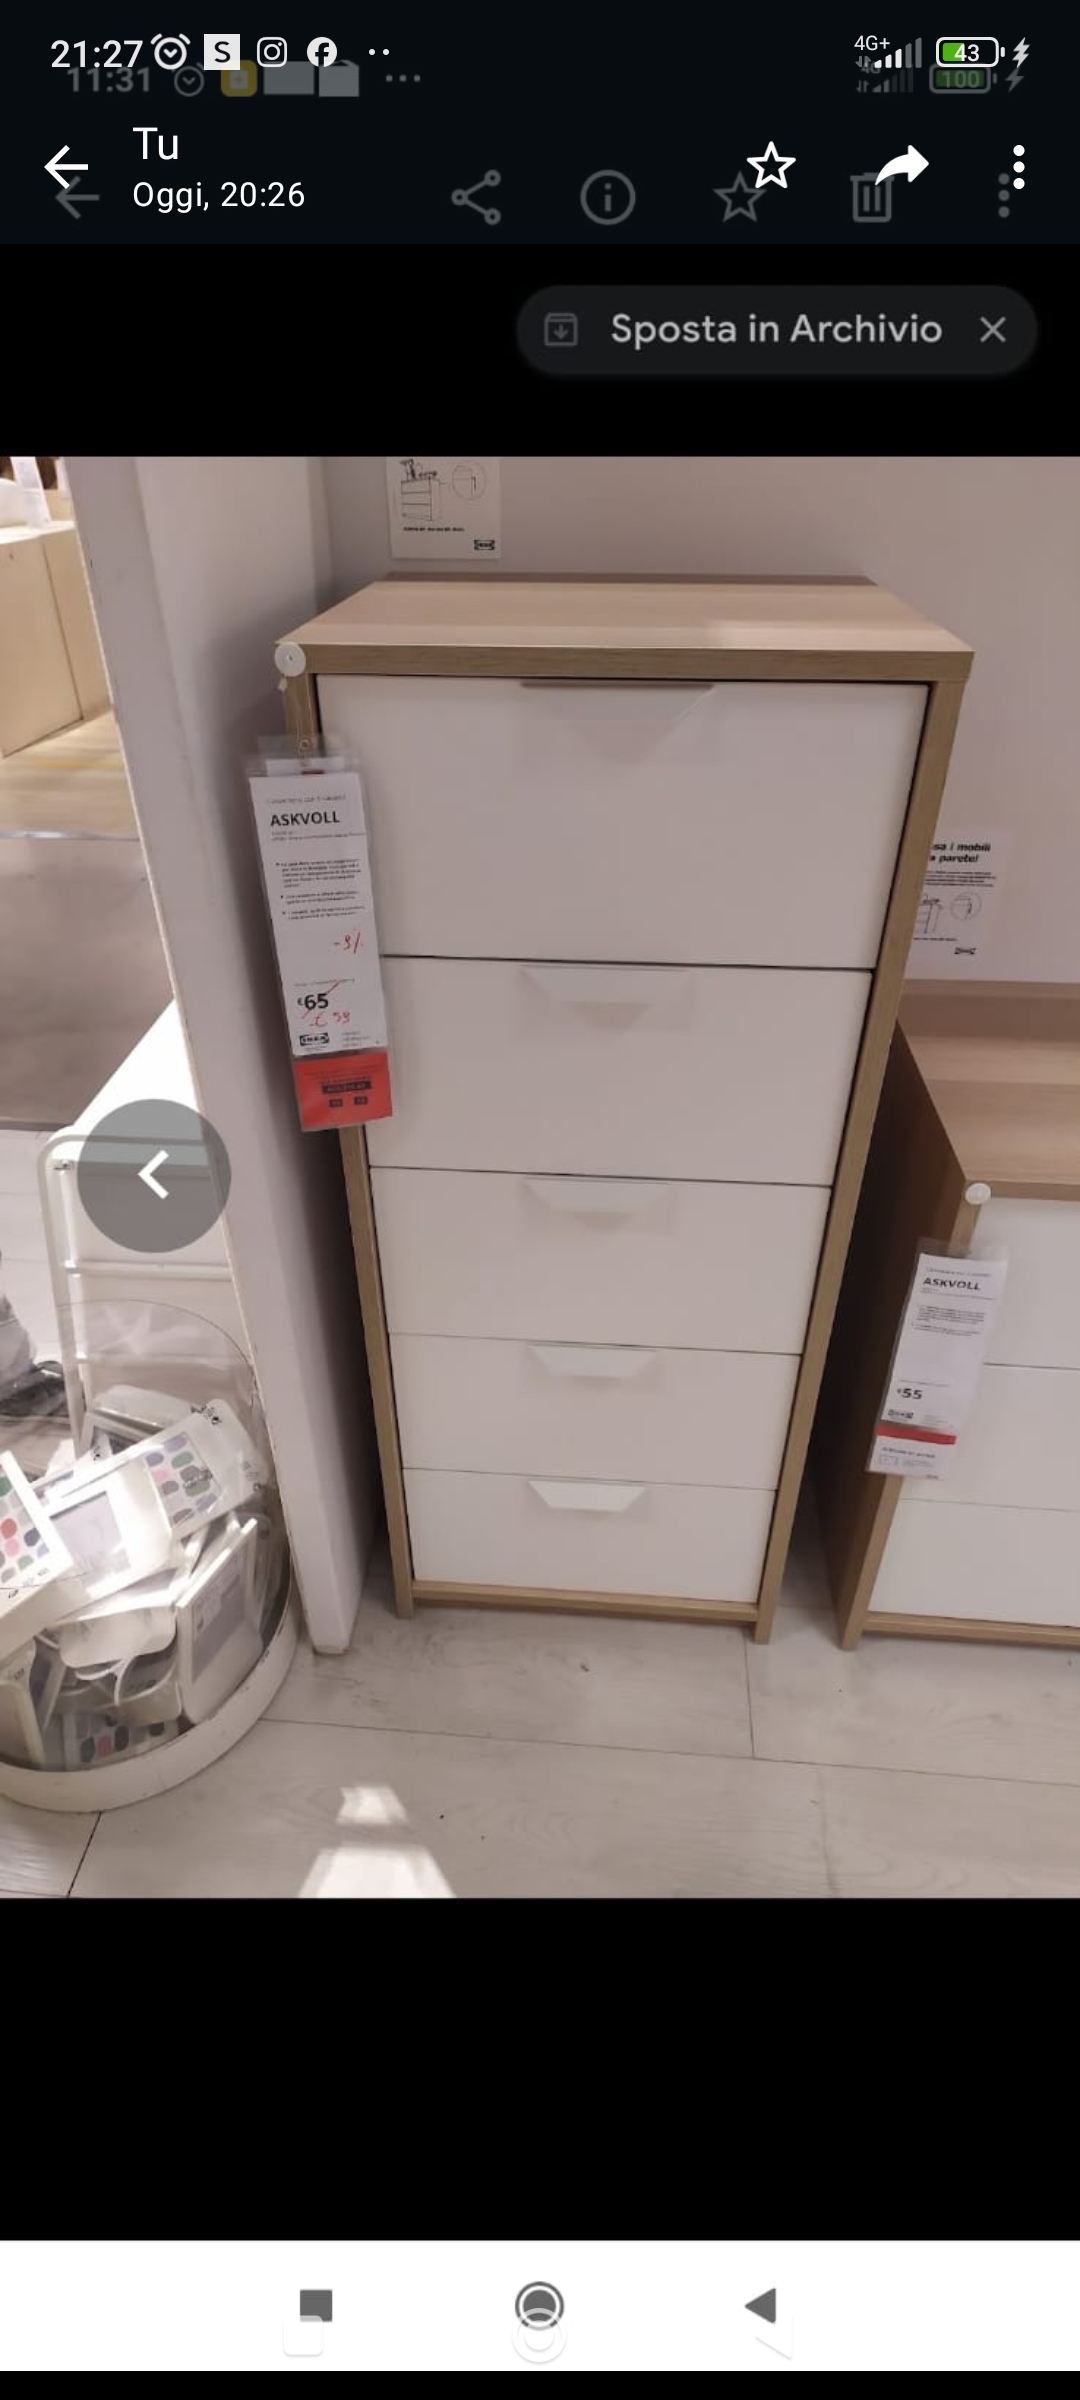 I would like to purchase this product (ASKVOLL chest of drawers with 5 drawers)